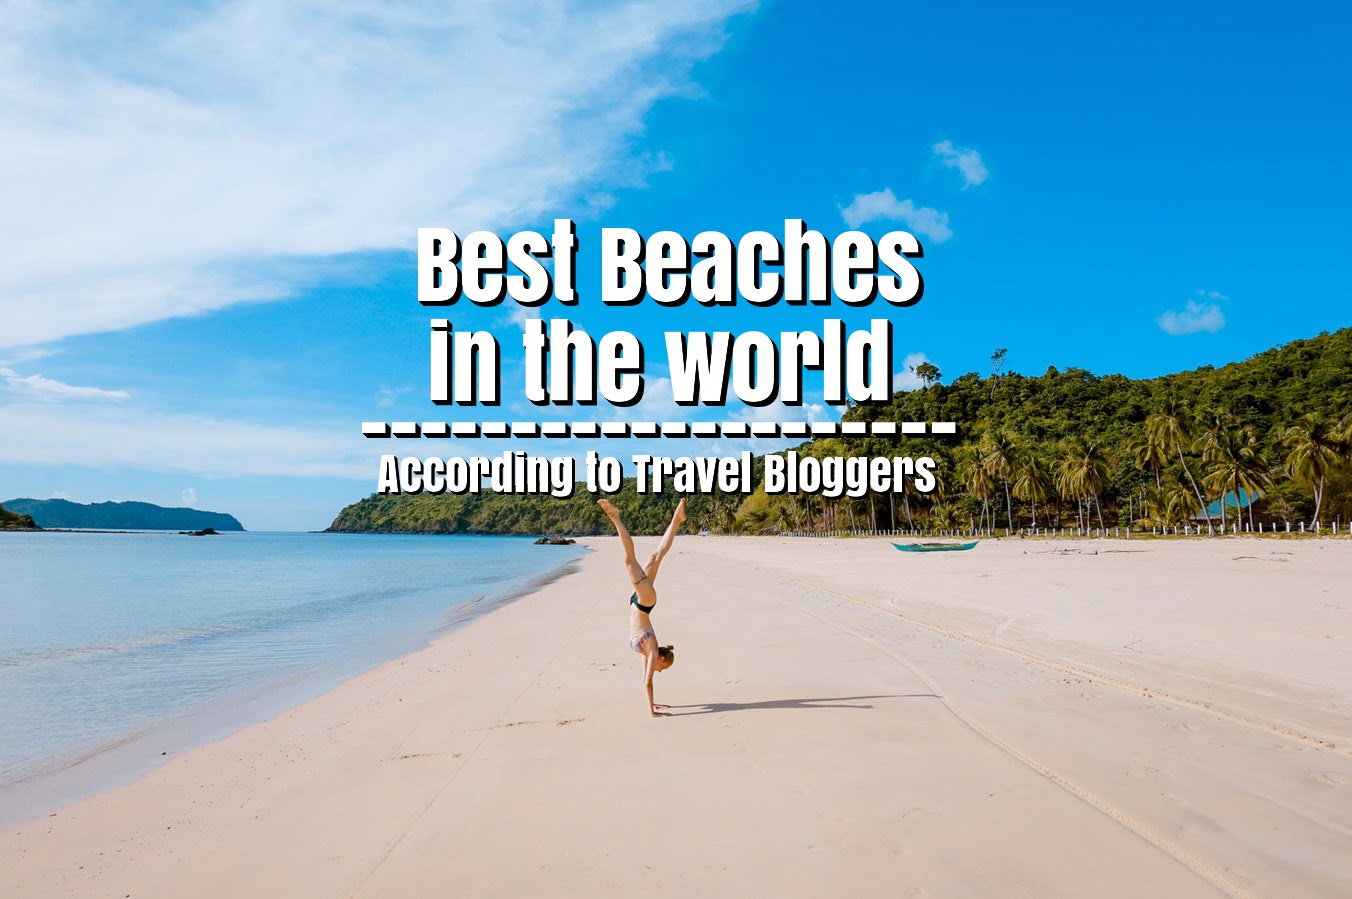 Best Beaches in the World According to Travel Bloggers | Page 1